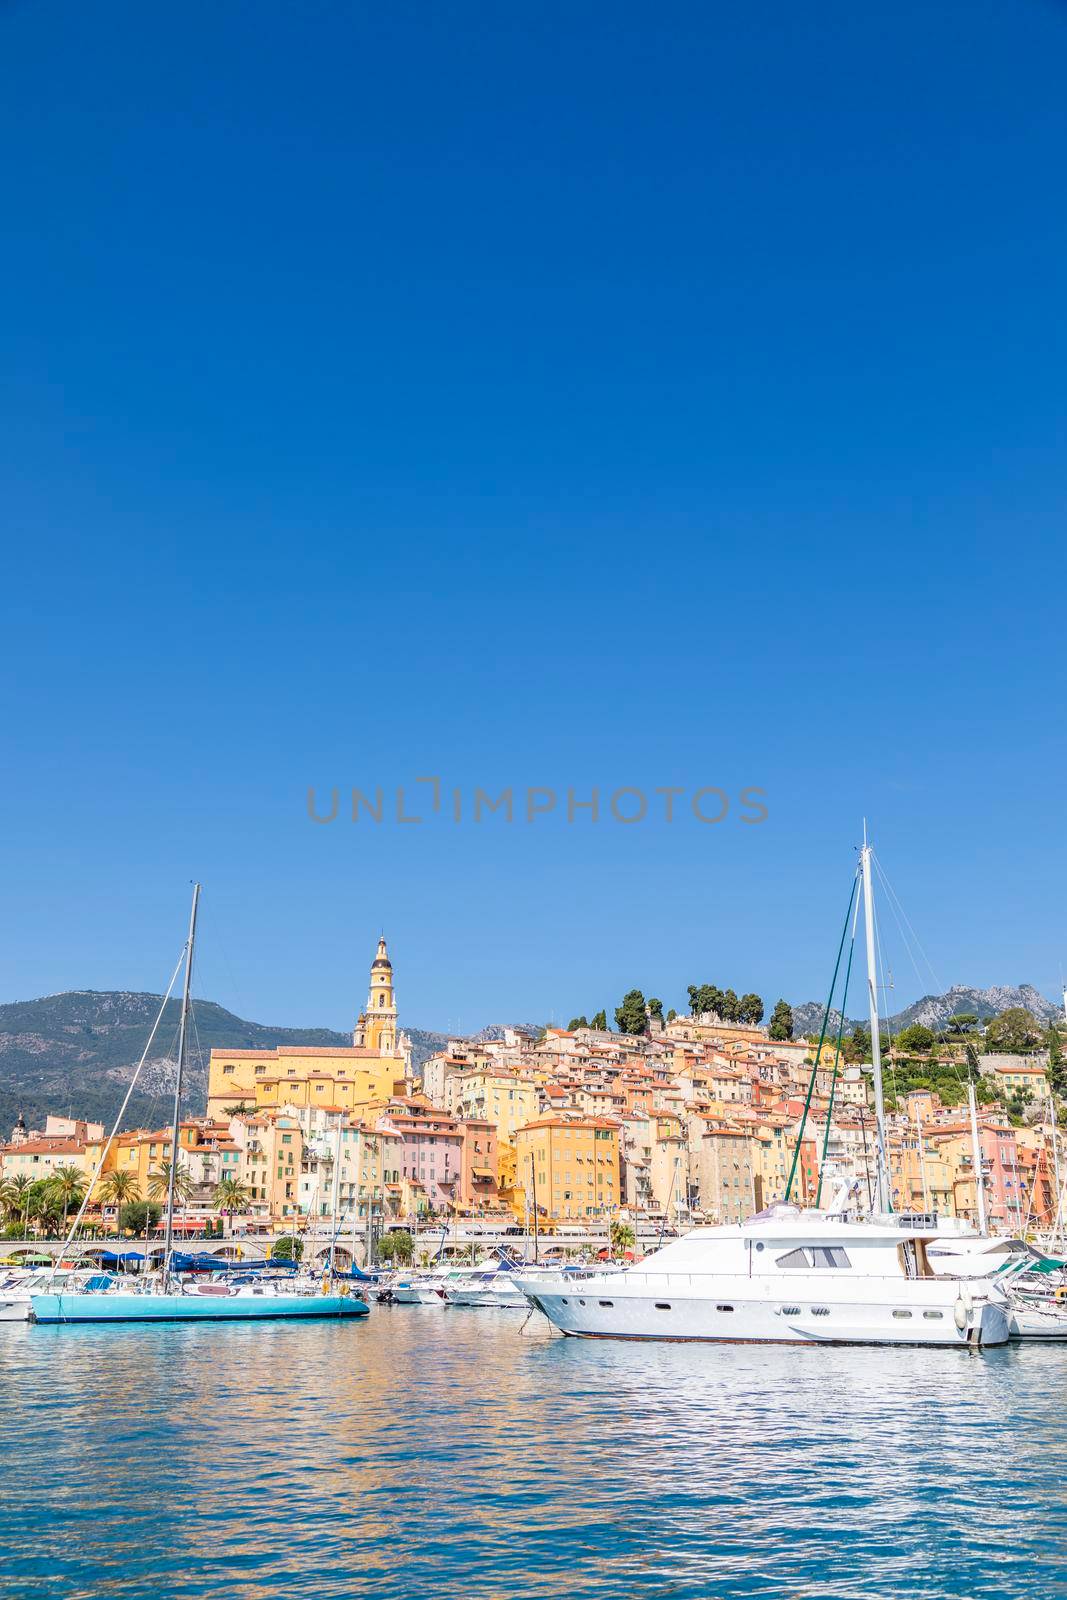 Menton on the French Riviera, named the Coast Azur, located in the South of France by Perseomedusa